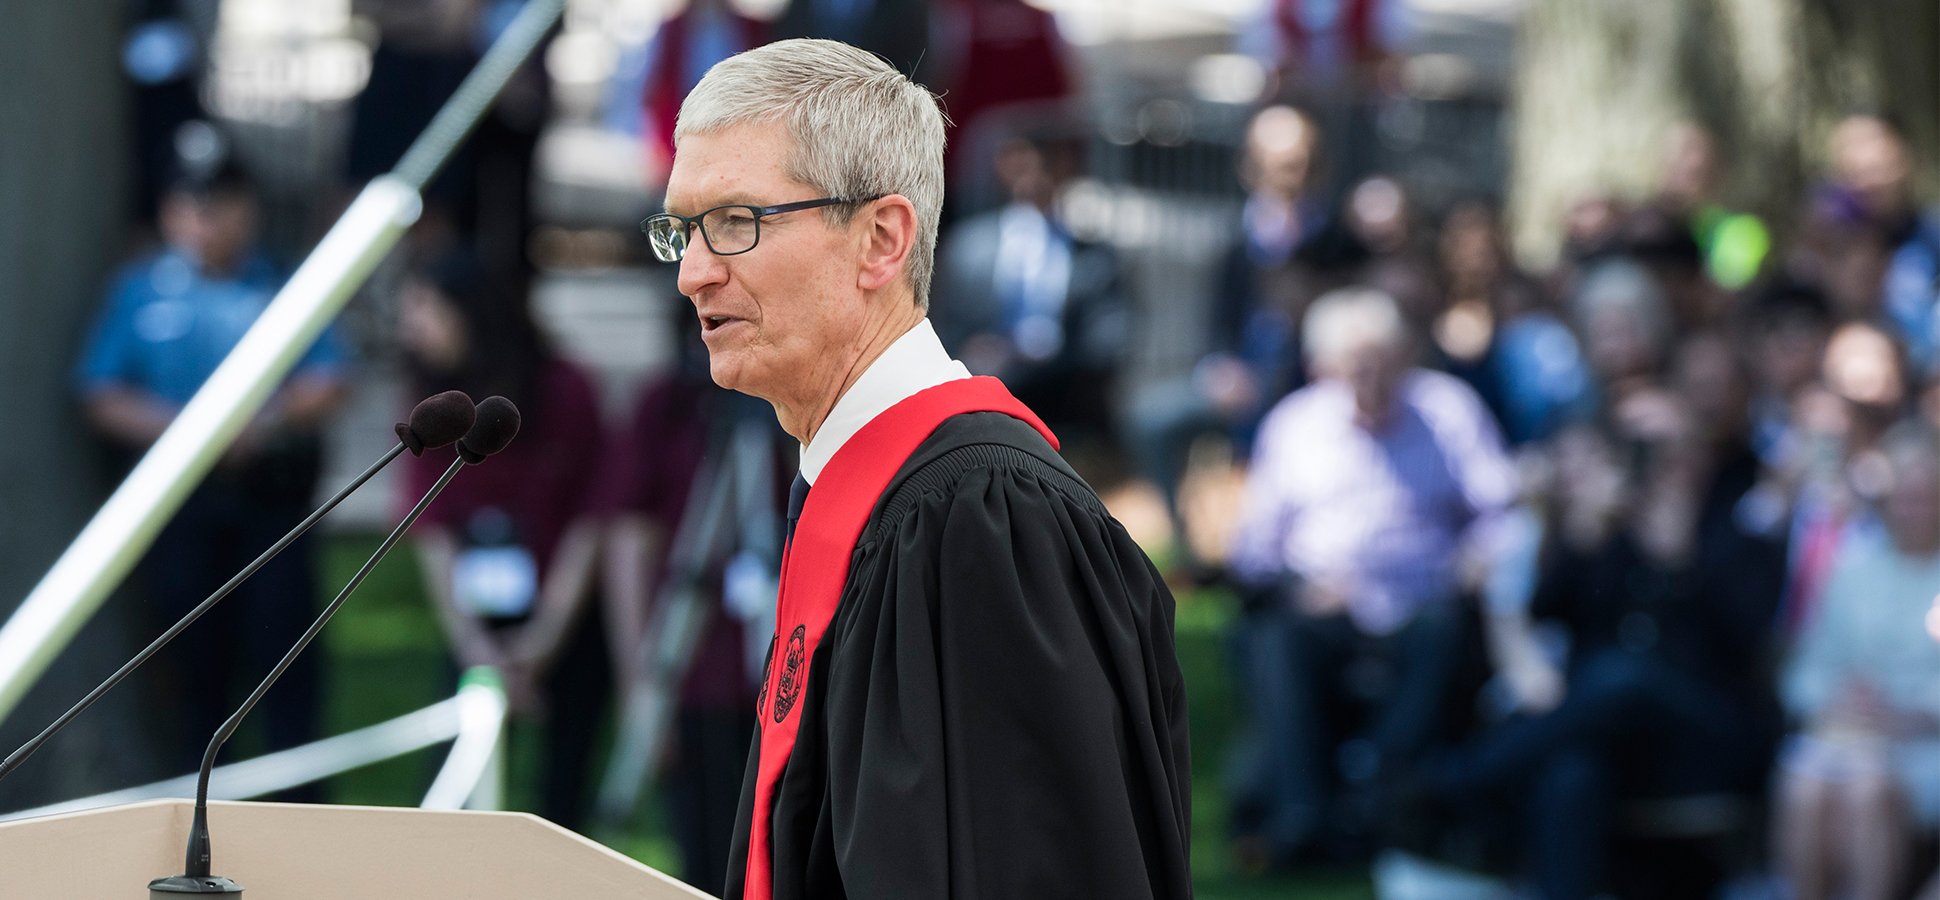 “I found my life got bigger when I stopped caring about what people thought of me.” : Tim Cook